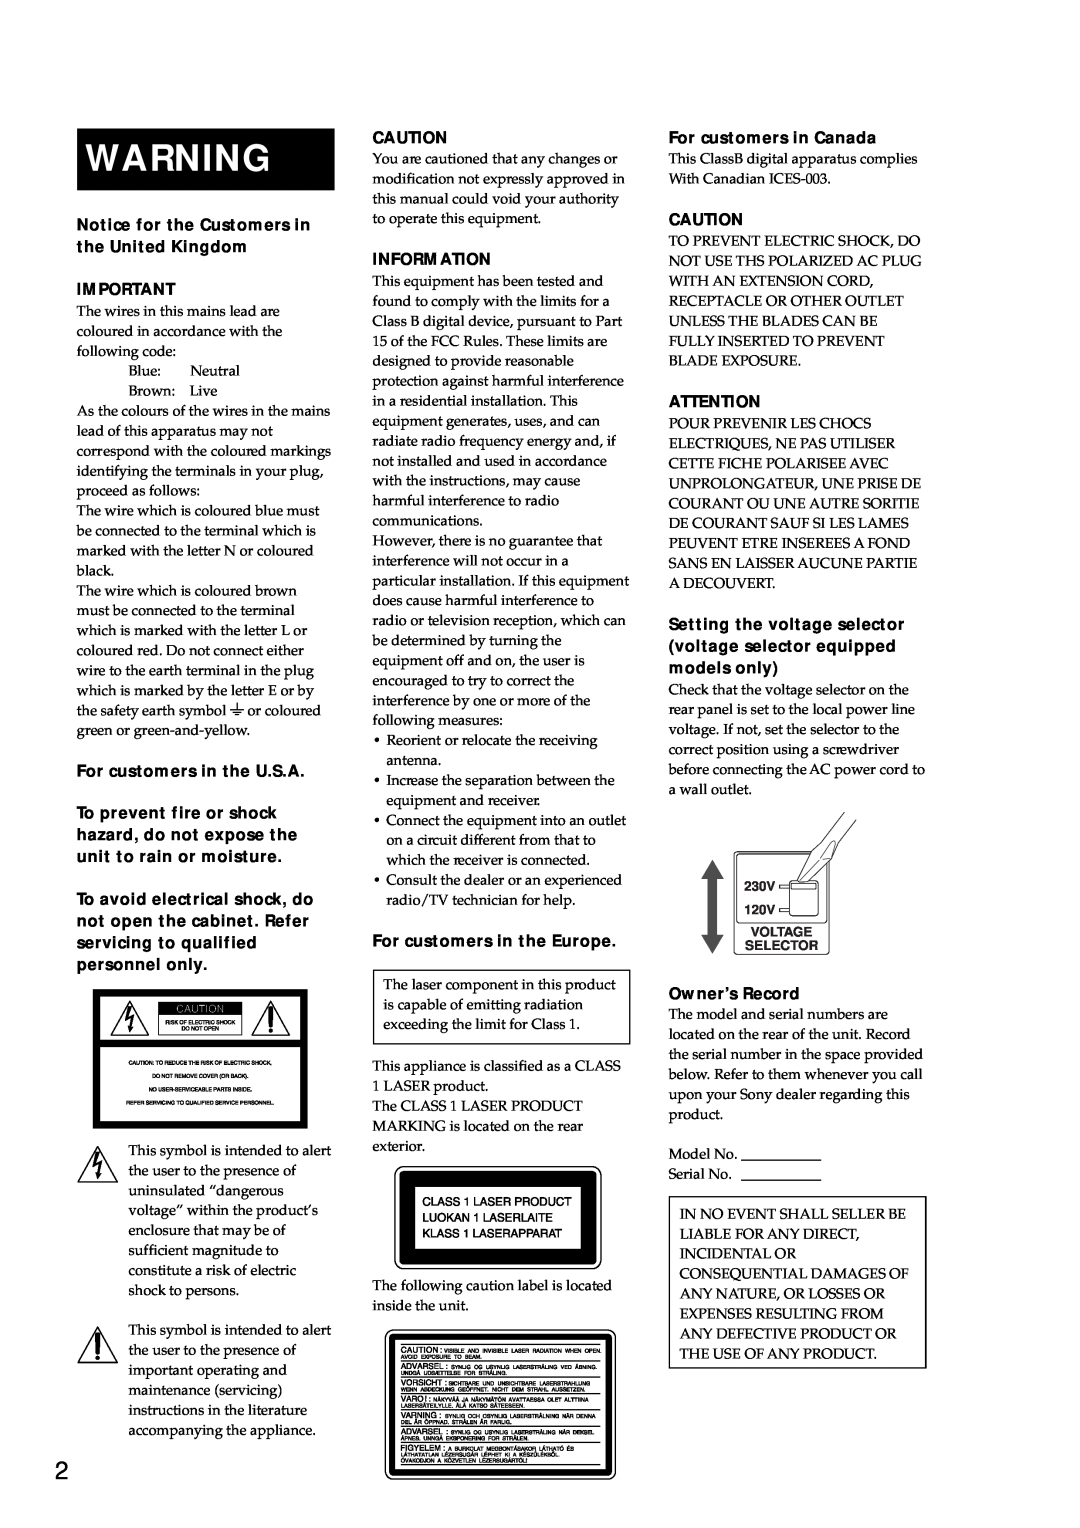 Sony MDS-E10 manual Notice for the Customers in the United Kingdom, For customers in the U.S.A, Information, Owner’s Record 